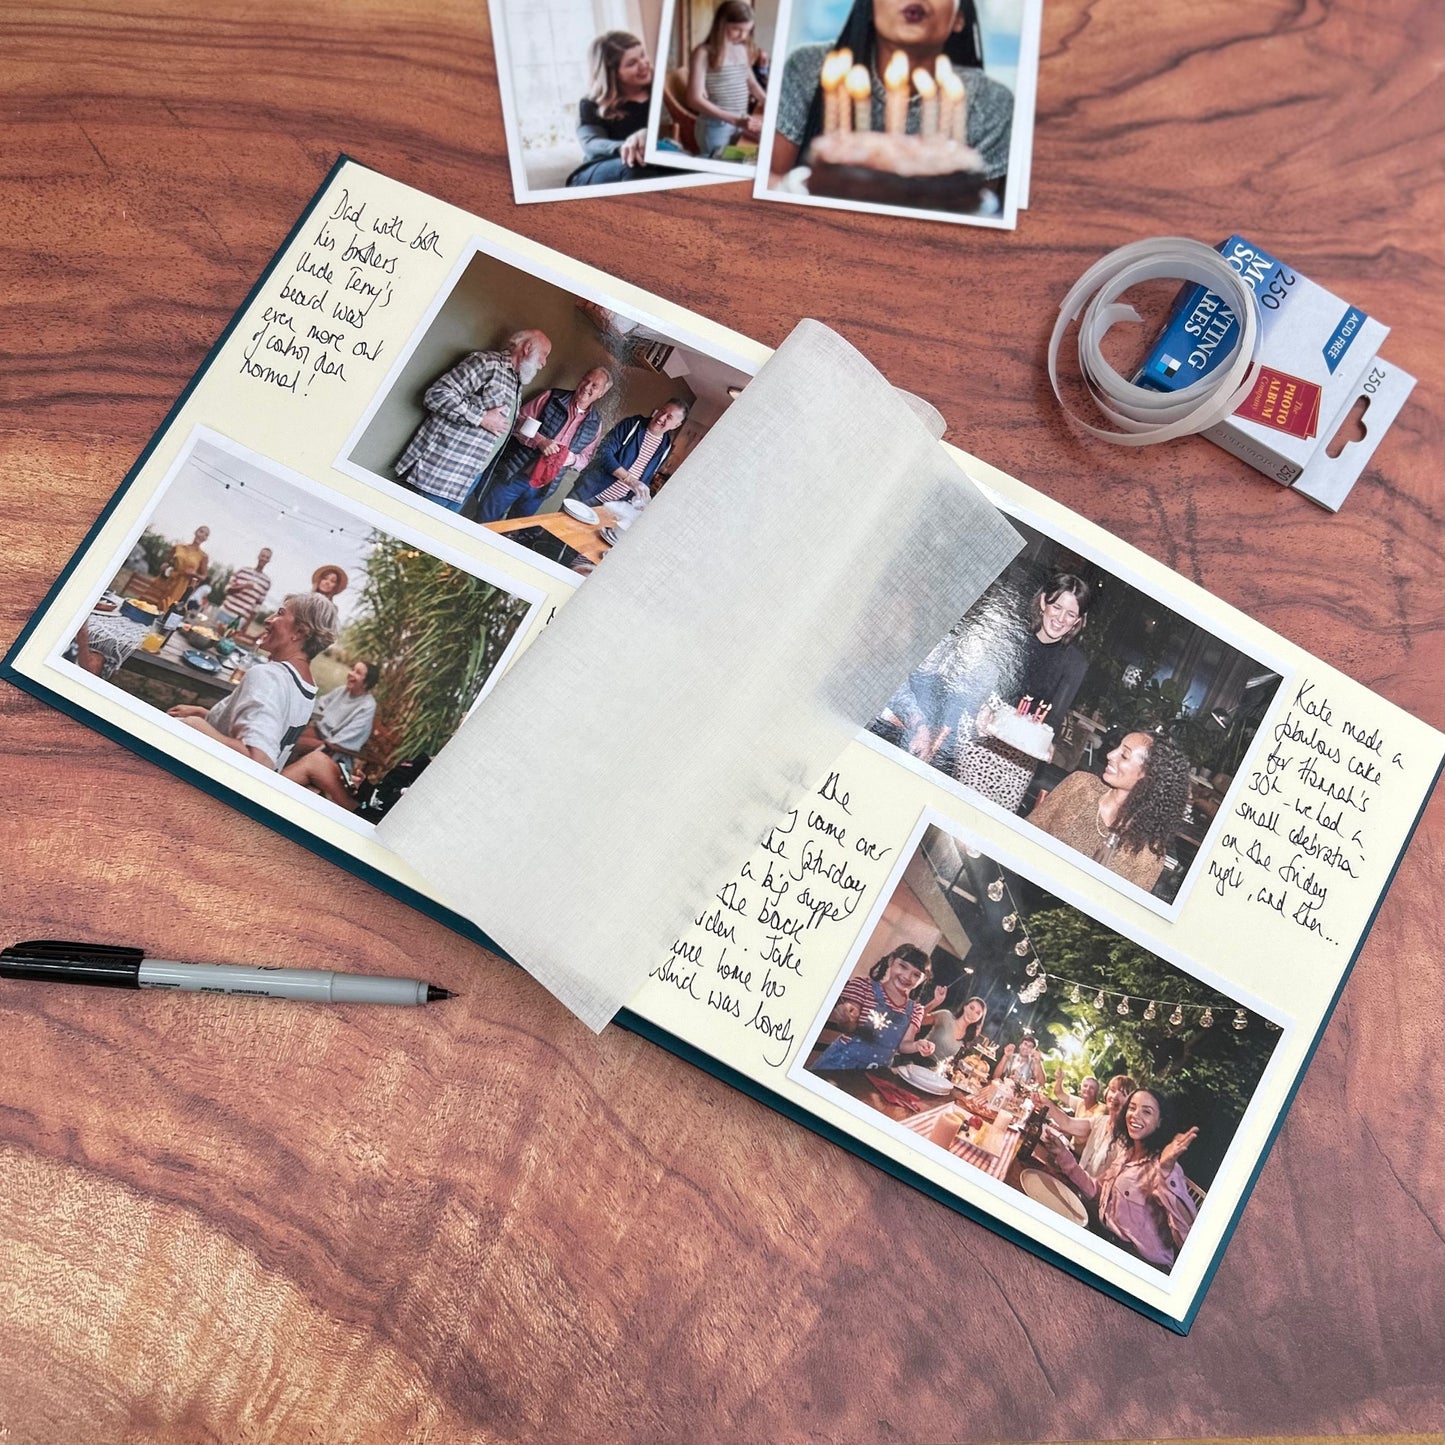 a family album lies open on a table and you can see that someone has put lots of photos in it and written personal messages. There are some mounting squares on the table too and a pen